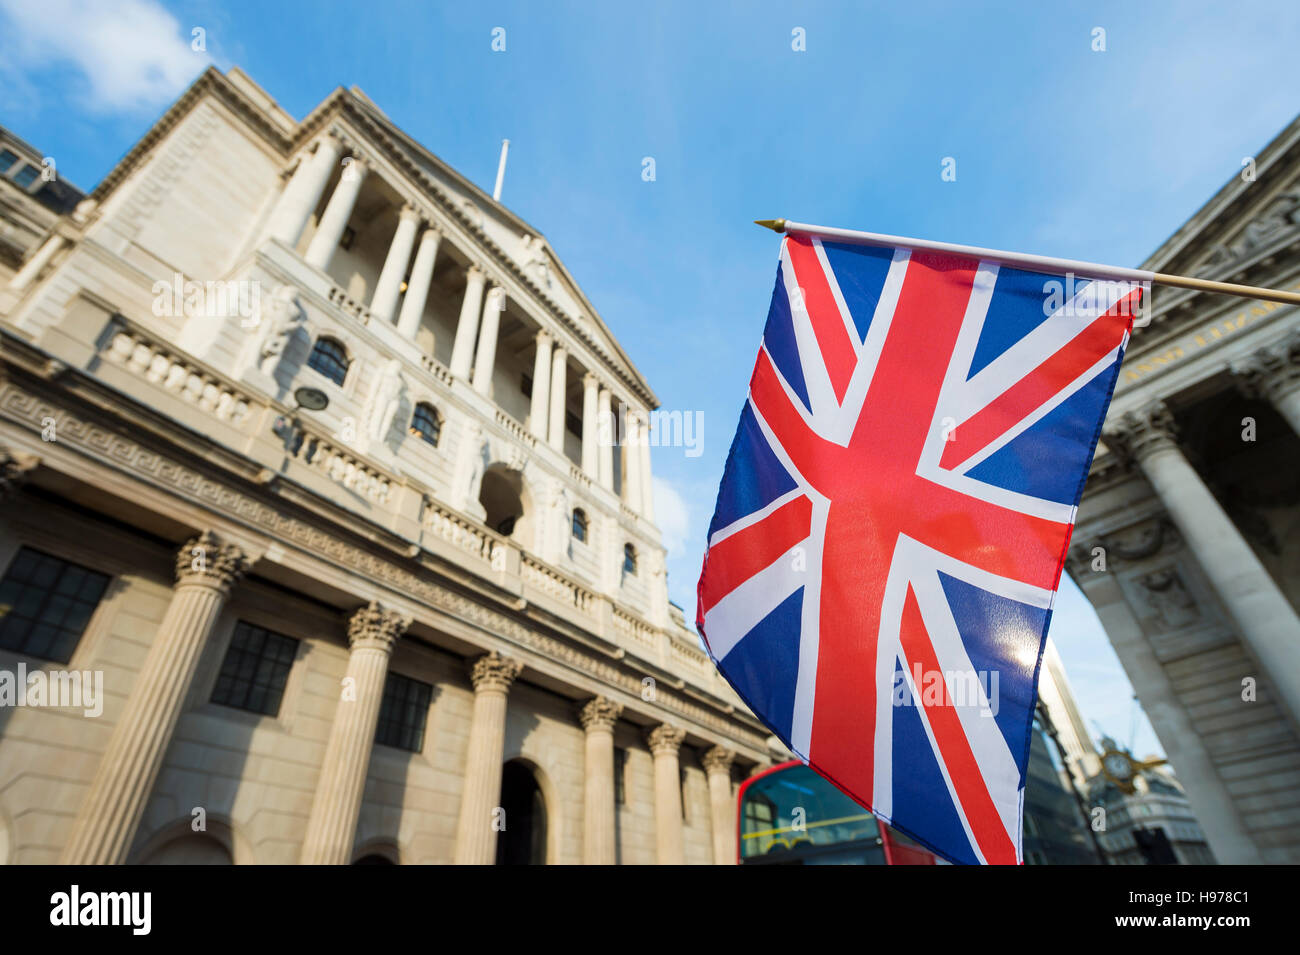 British Union Jack flag flying in front of the Bank of England in the City of London financial center Stock Photo